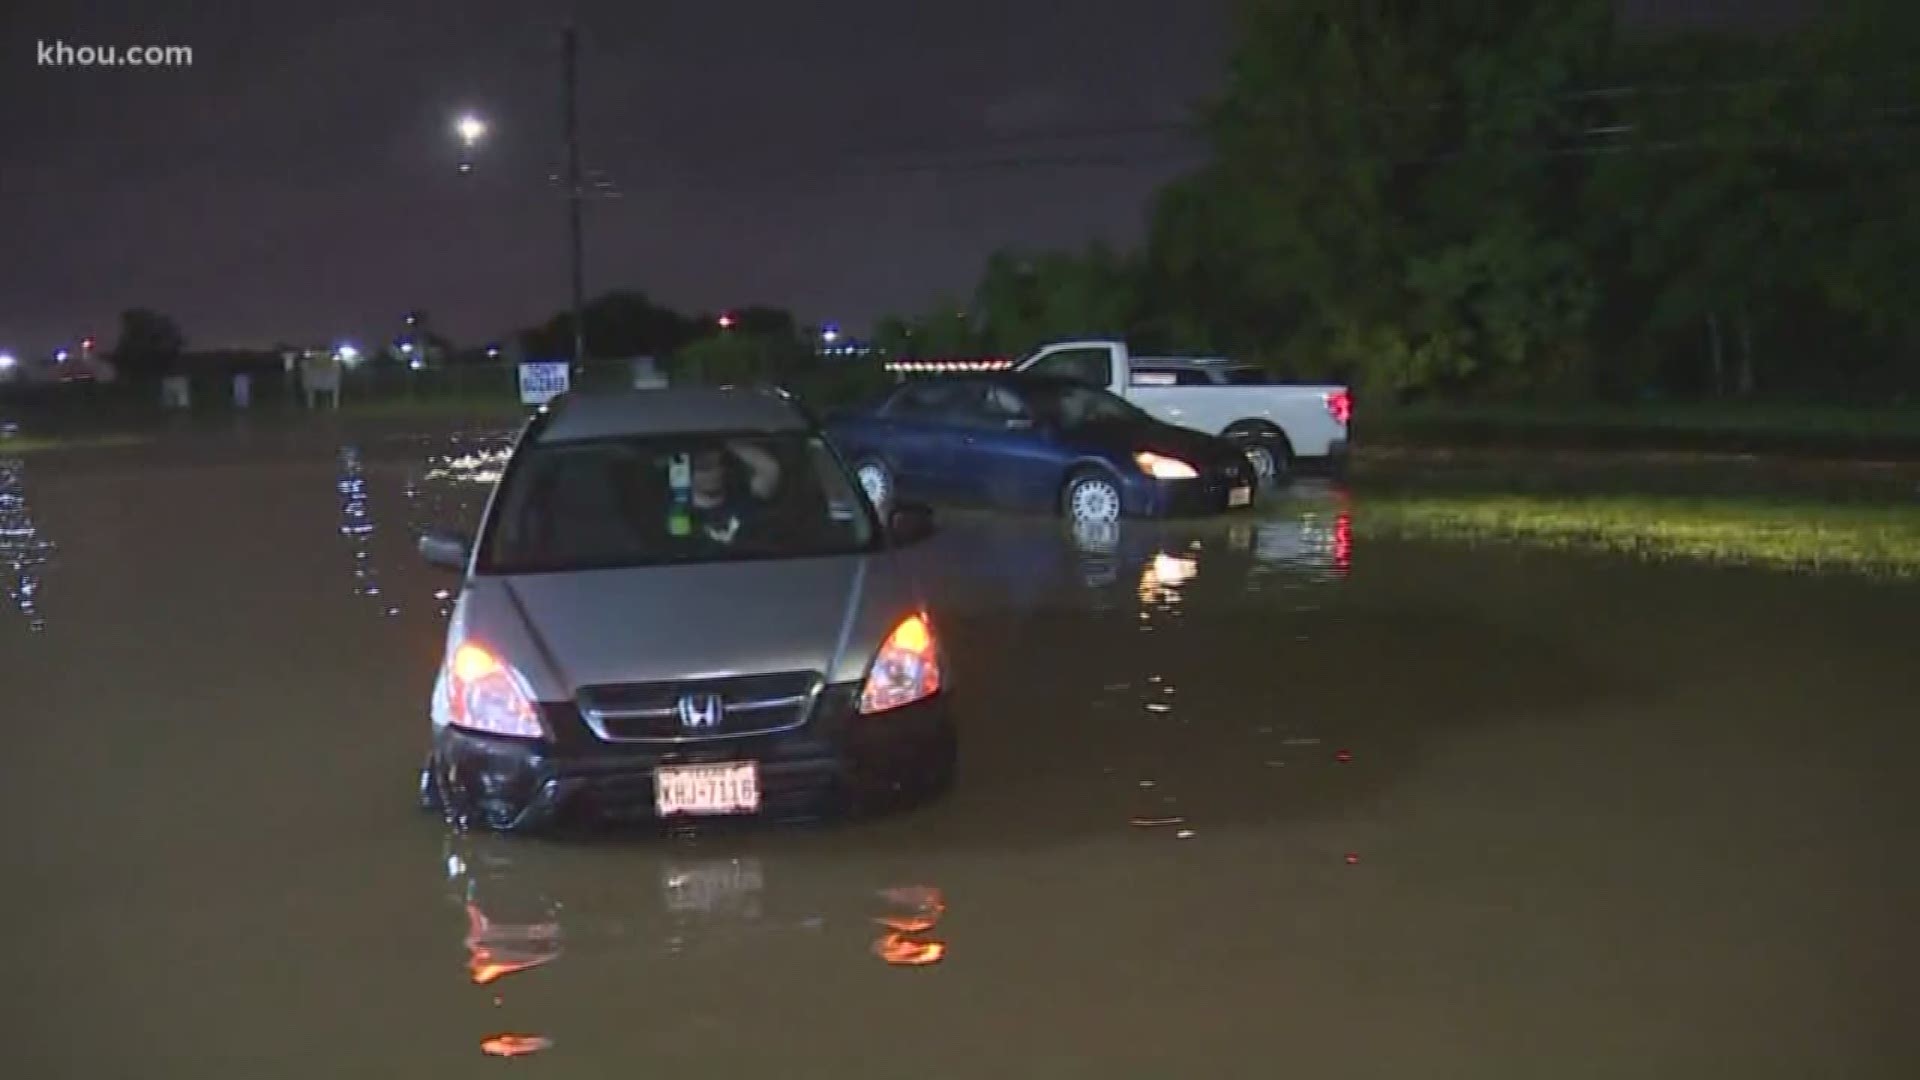 Several cars were stranded along roads near Hobby Airport due to flooding from Tropical Depression Imelda.